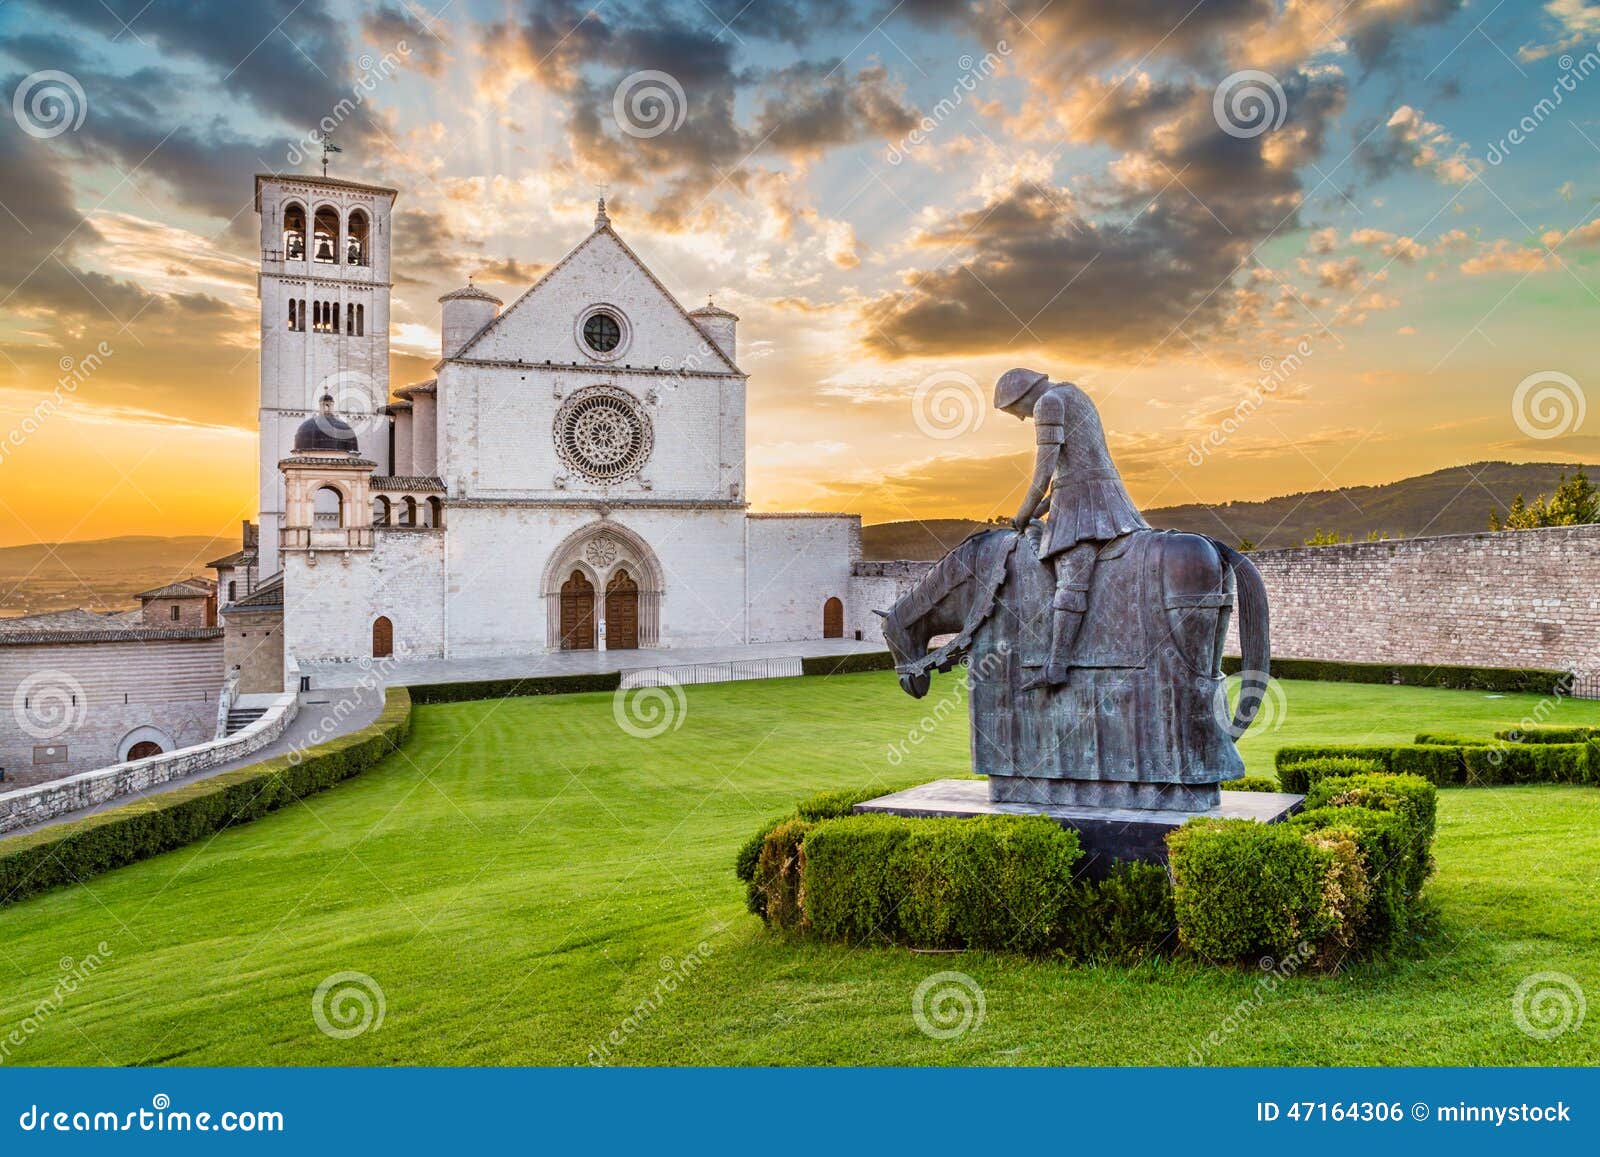 basilica of st. francis of assisi at sunset, umbria, italy